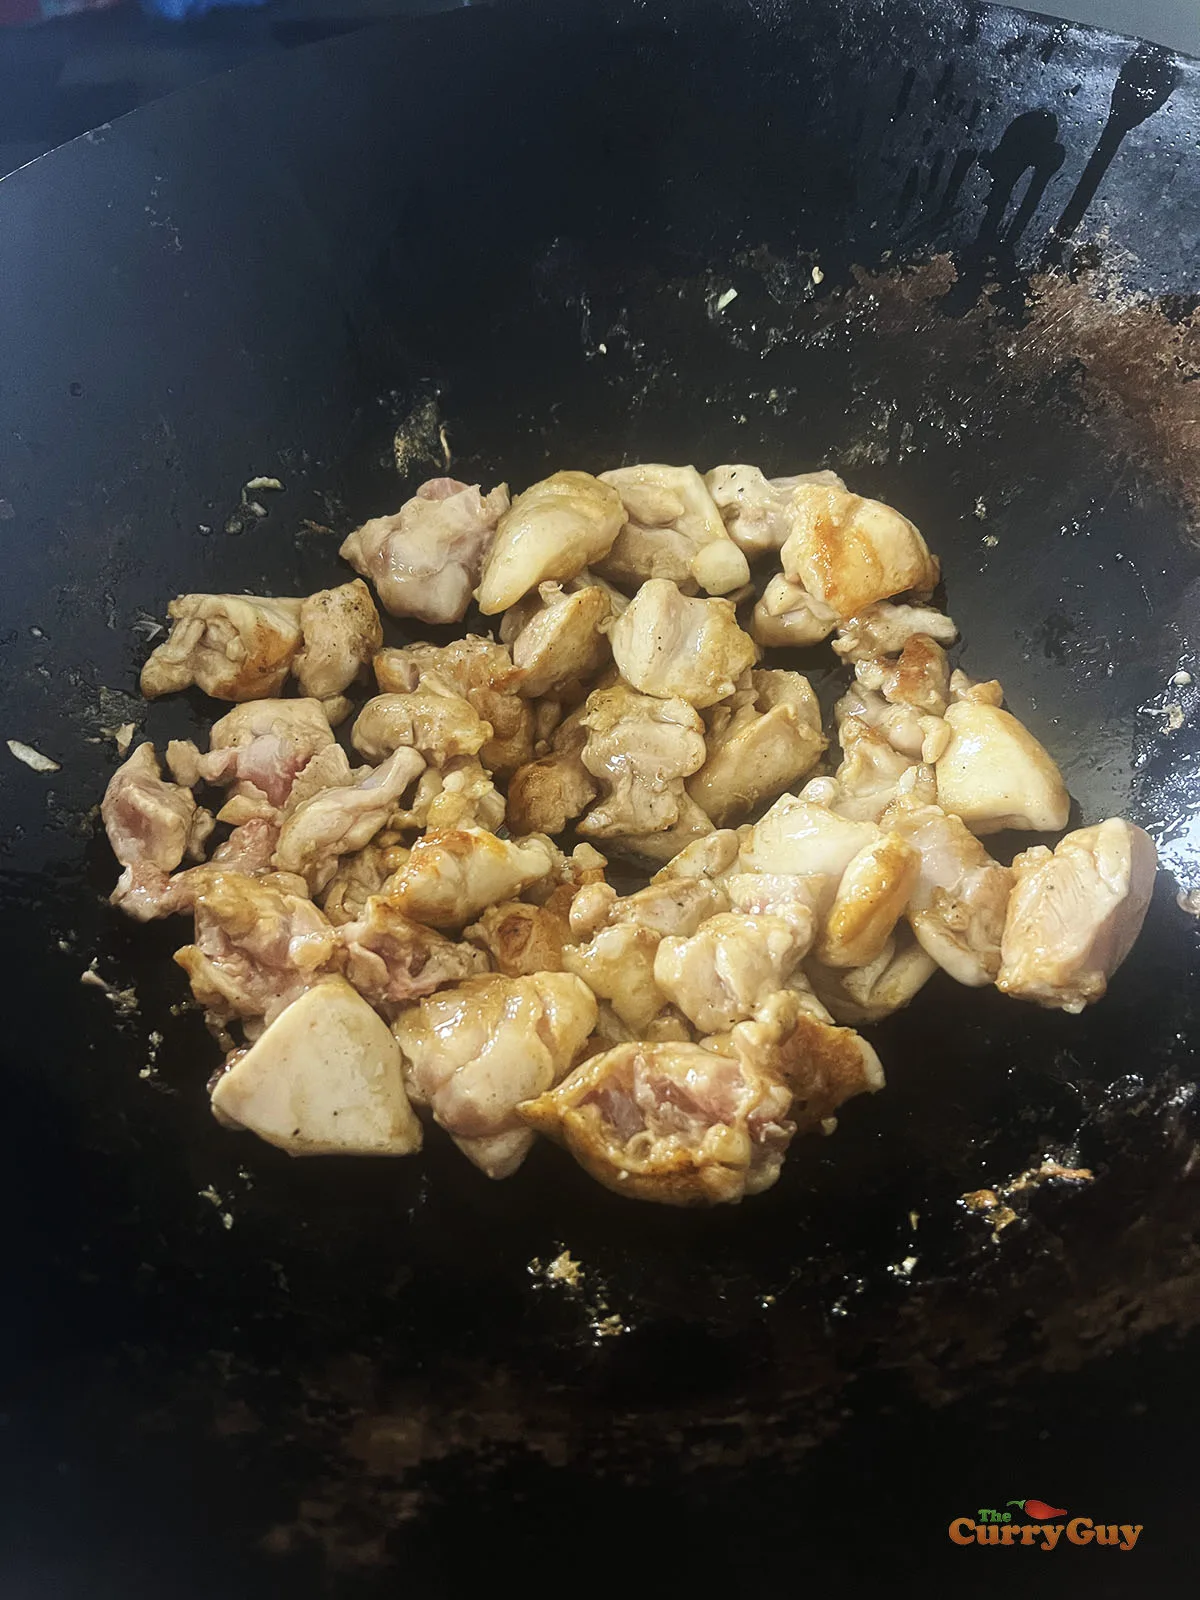 Cooking the other side of the chicken pieces.